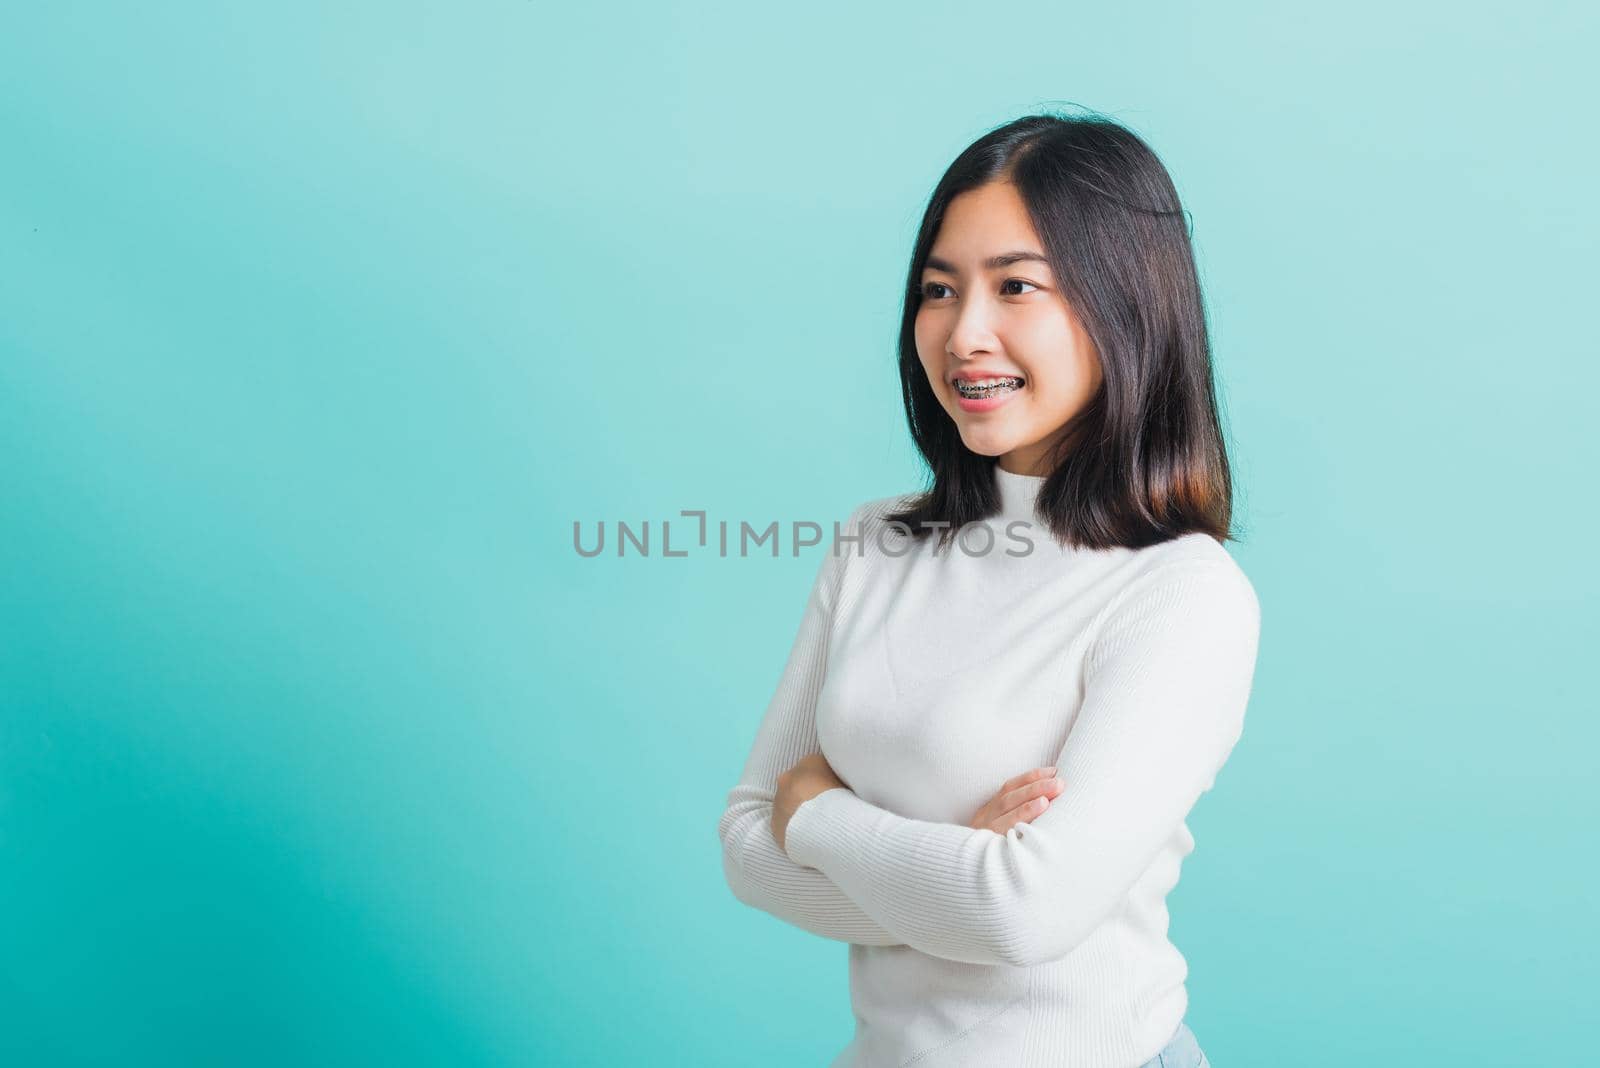 Young beautiful Asian woman smiling with crossed arms, Portrait of positive confident female stand cross one's arm, studio shot isolated on a blue background